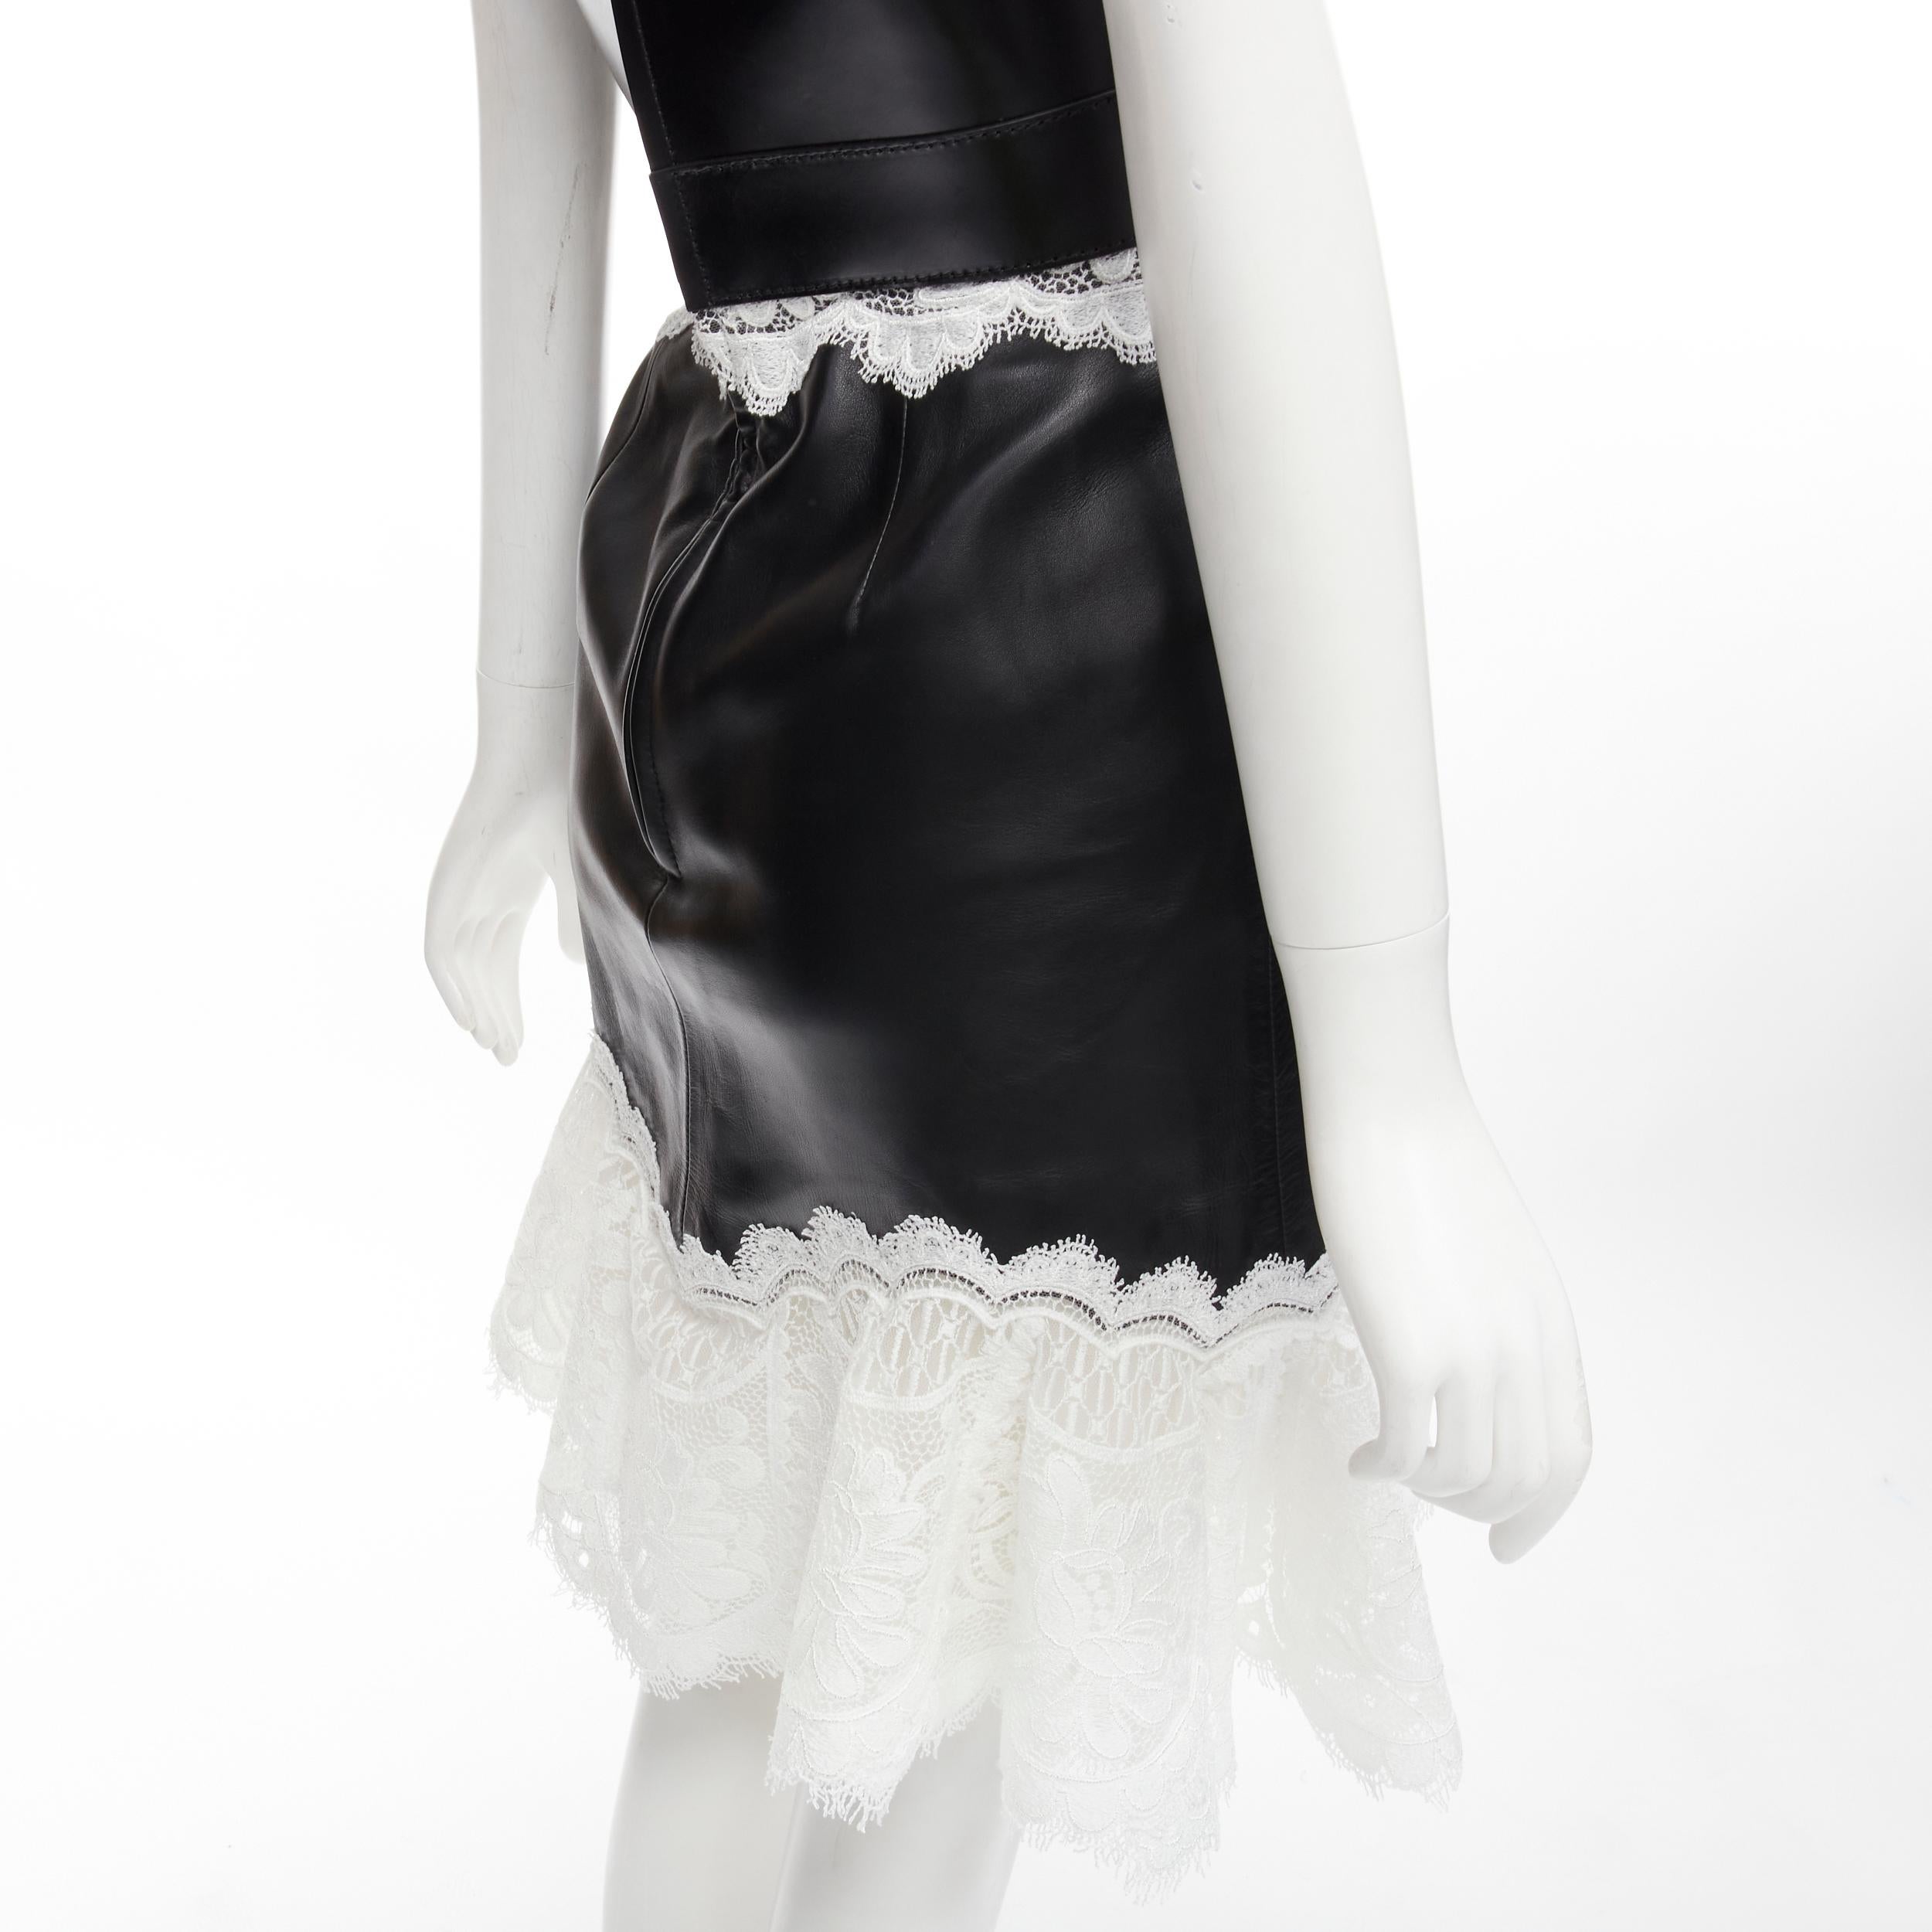 ALEXANDER MCQUEEN 2020 Runway black leather bustier white lace dress IT38 S For Sale 4